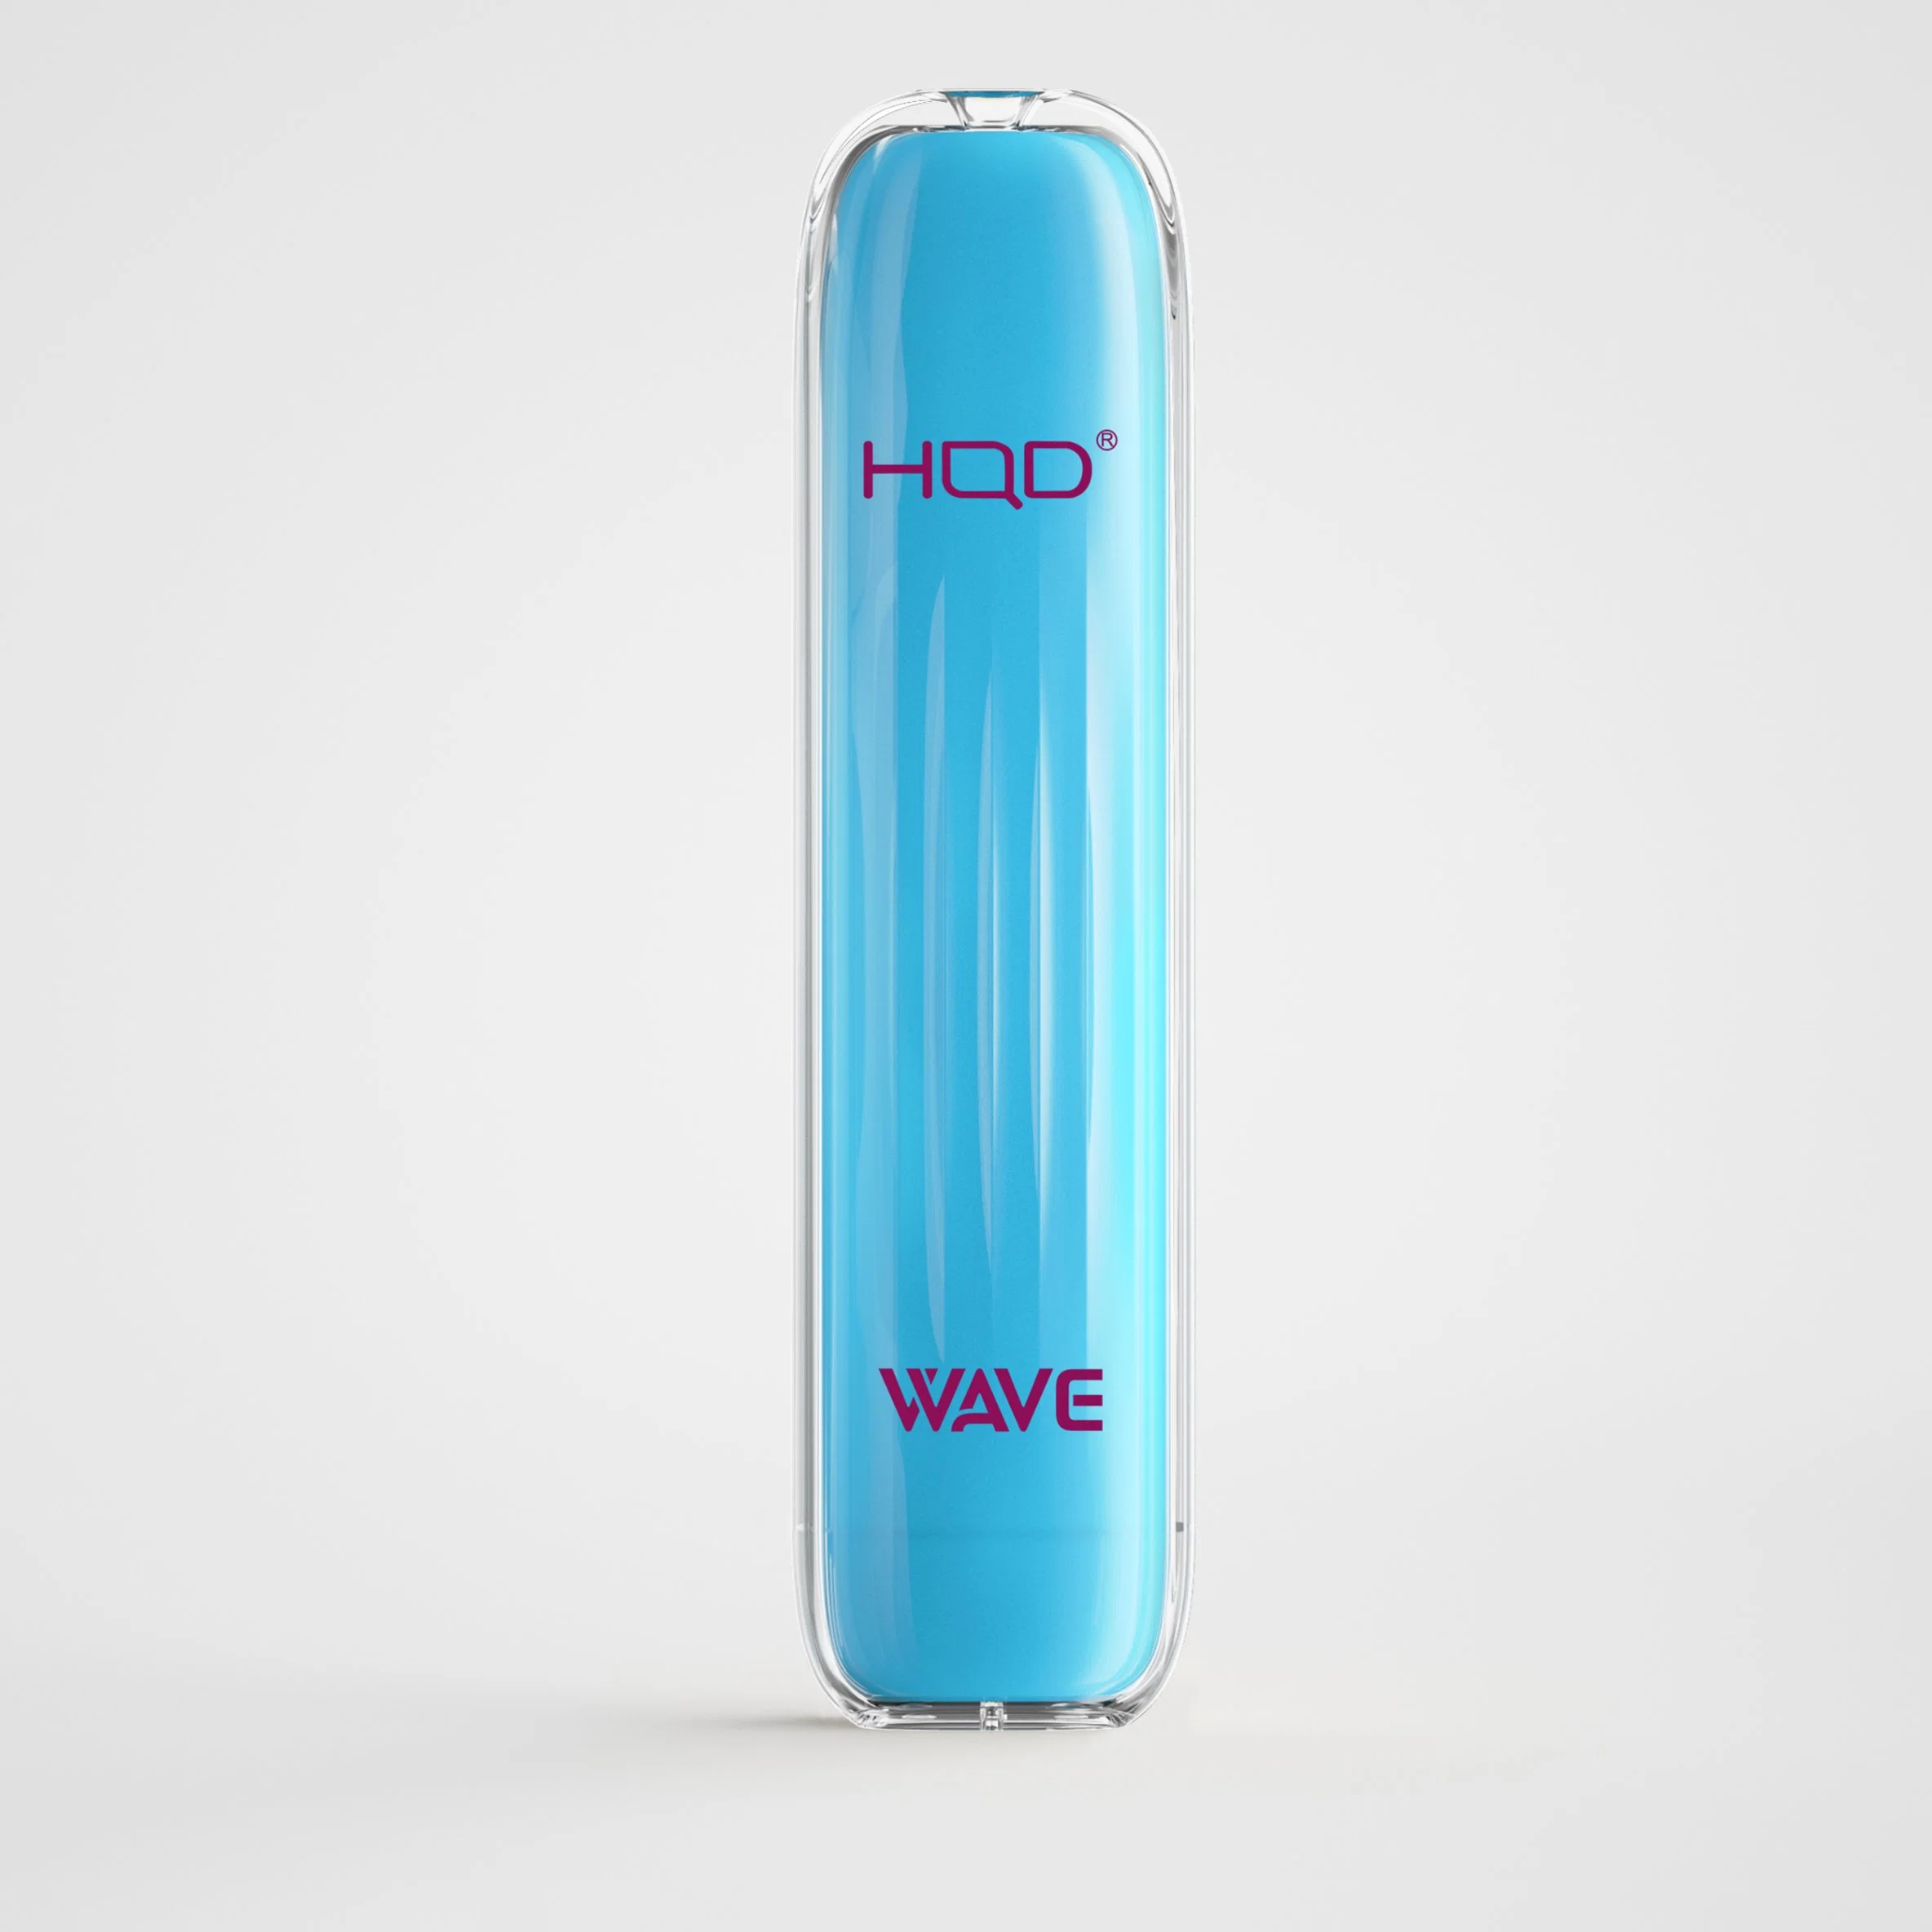 Hqd European Hot Sell 600 Puffs Tpd 500mAh Wave vape Disposable/Chargeable Vape